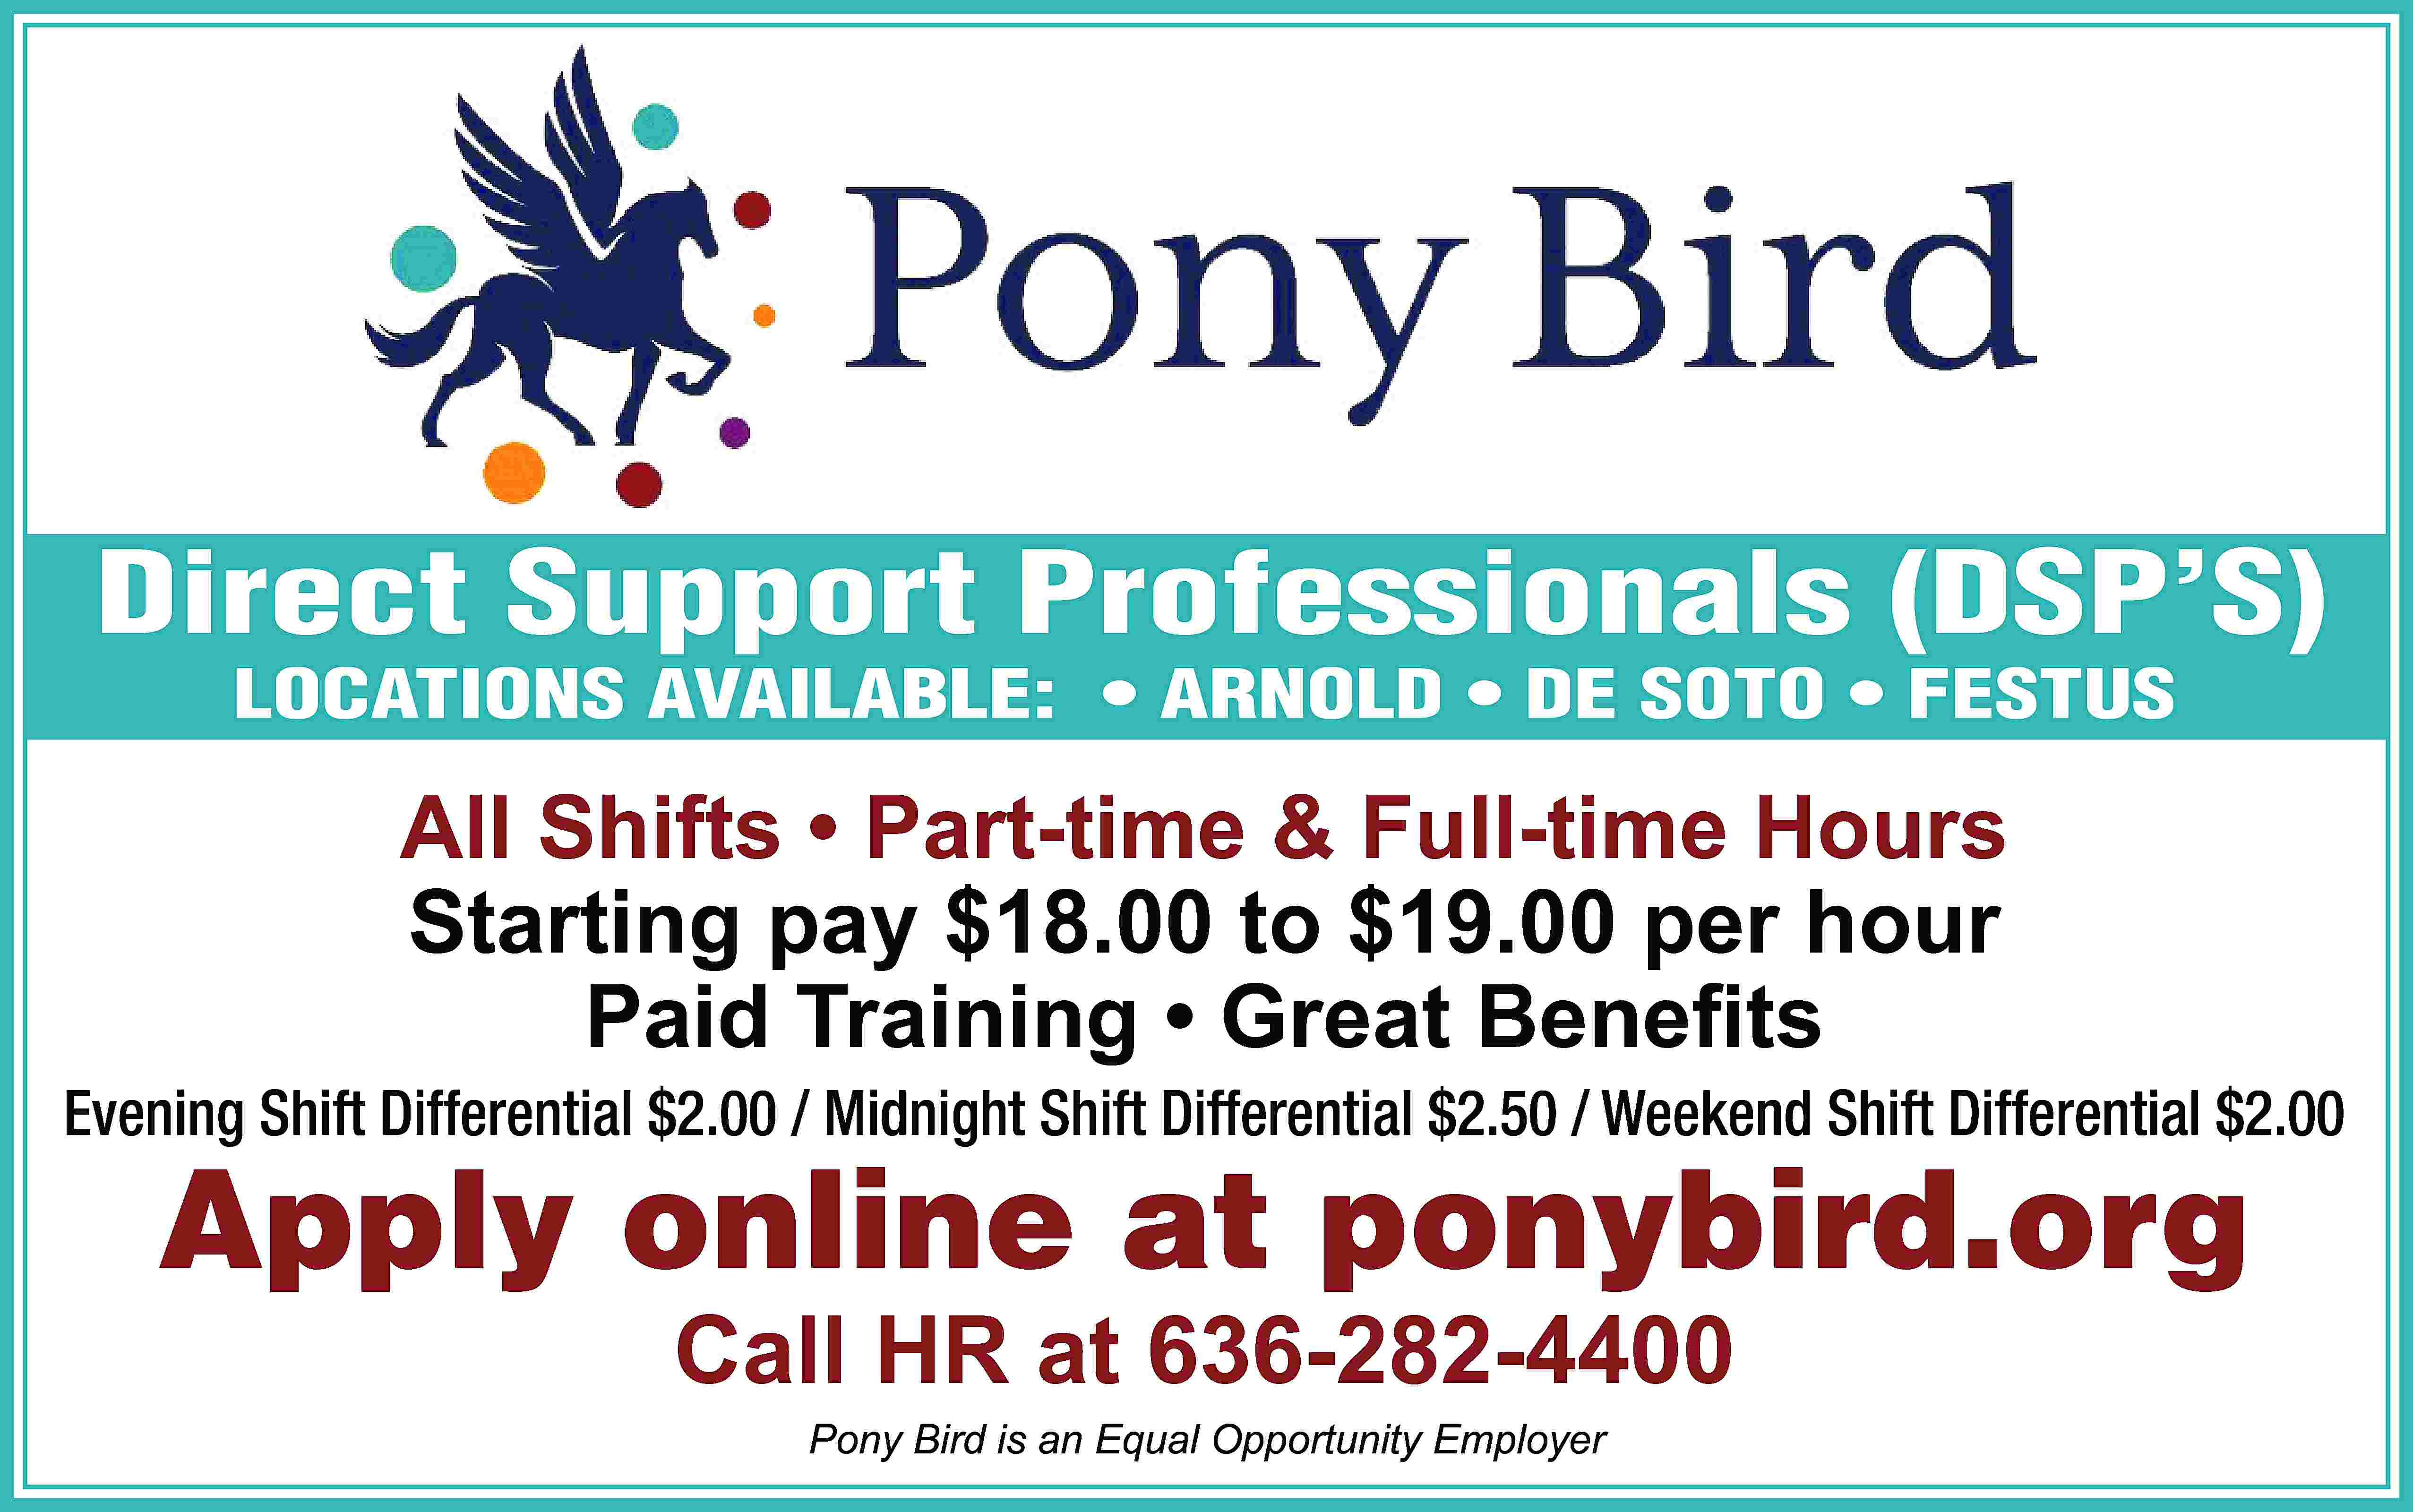 Direct Support Professionals (DSP’S) LOCATIONS  Direct Support Professionals (DSP’S) LOCATIONS AVAILABLE: • ARNOLD • DE SOTO • FESTUS All Shifts • Part-time & Full-time Hours Starting pay $18.00 to $19.00 per hour Paid Training • Great Beneﬁts Evening Shift Differential $2.00 / Midnight Shift Differential $2.50 / Weekend Shift Differential $2.00 Apply online at ponybird.org Call HR at 636-282-4400 Pony Bird is an Equal Opportunity Employer